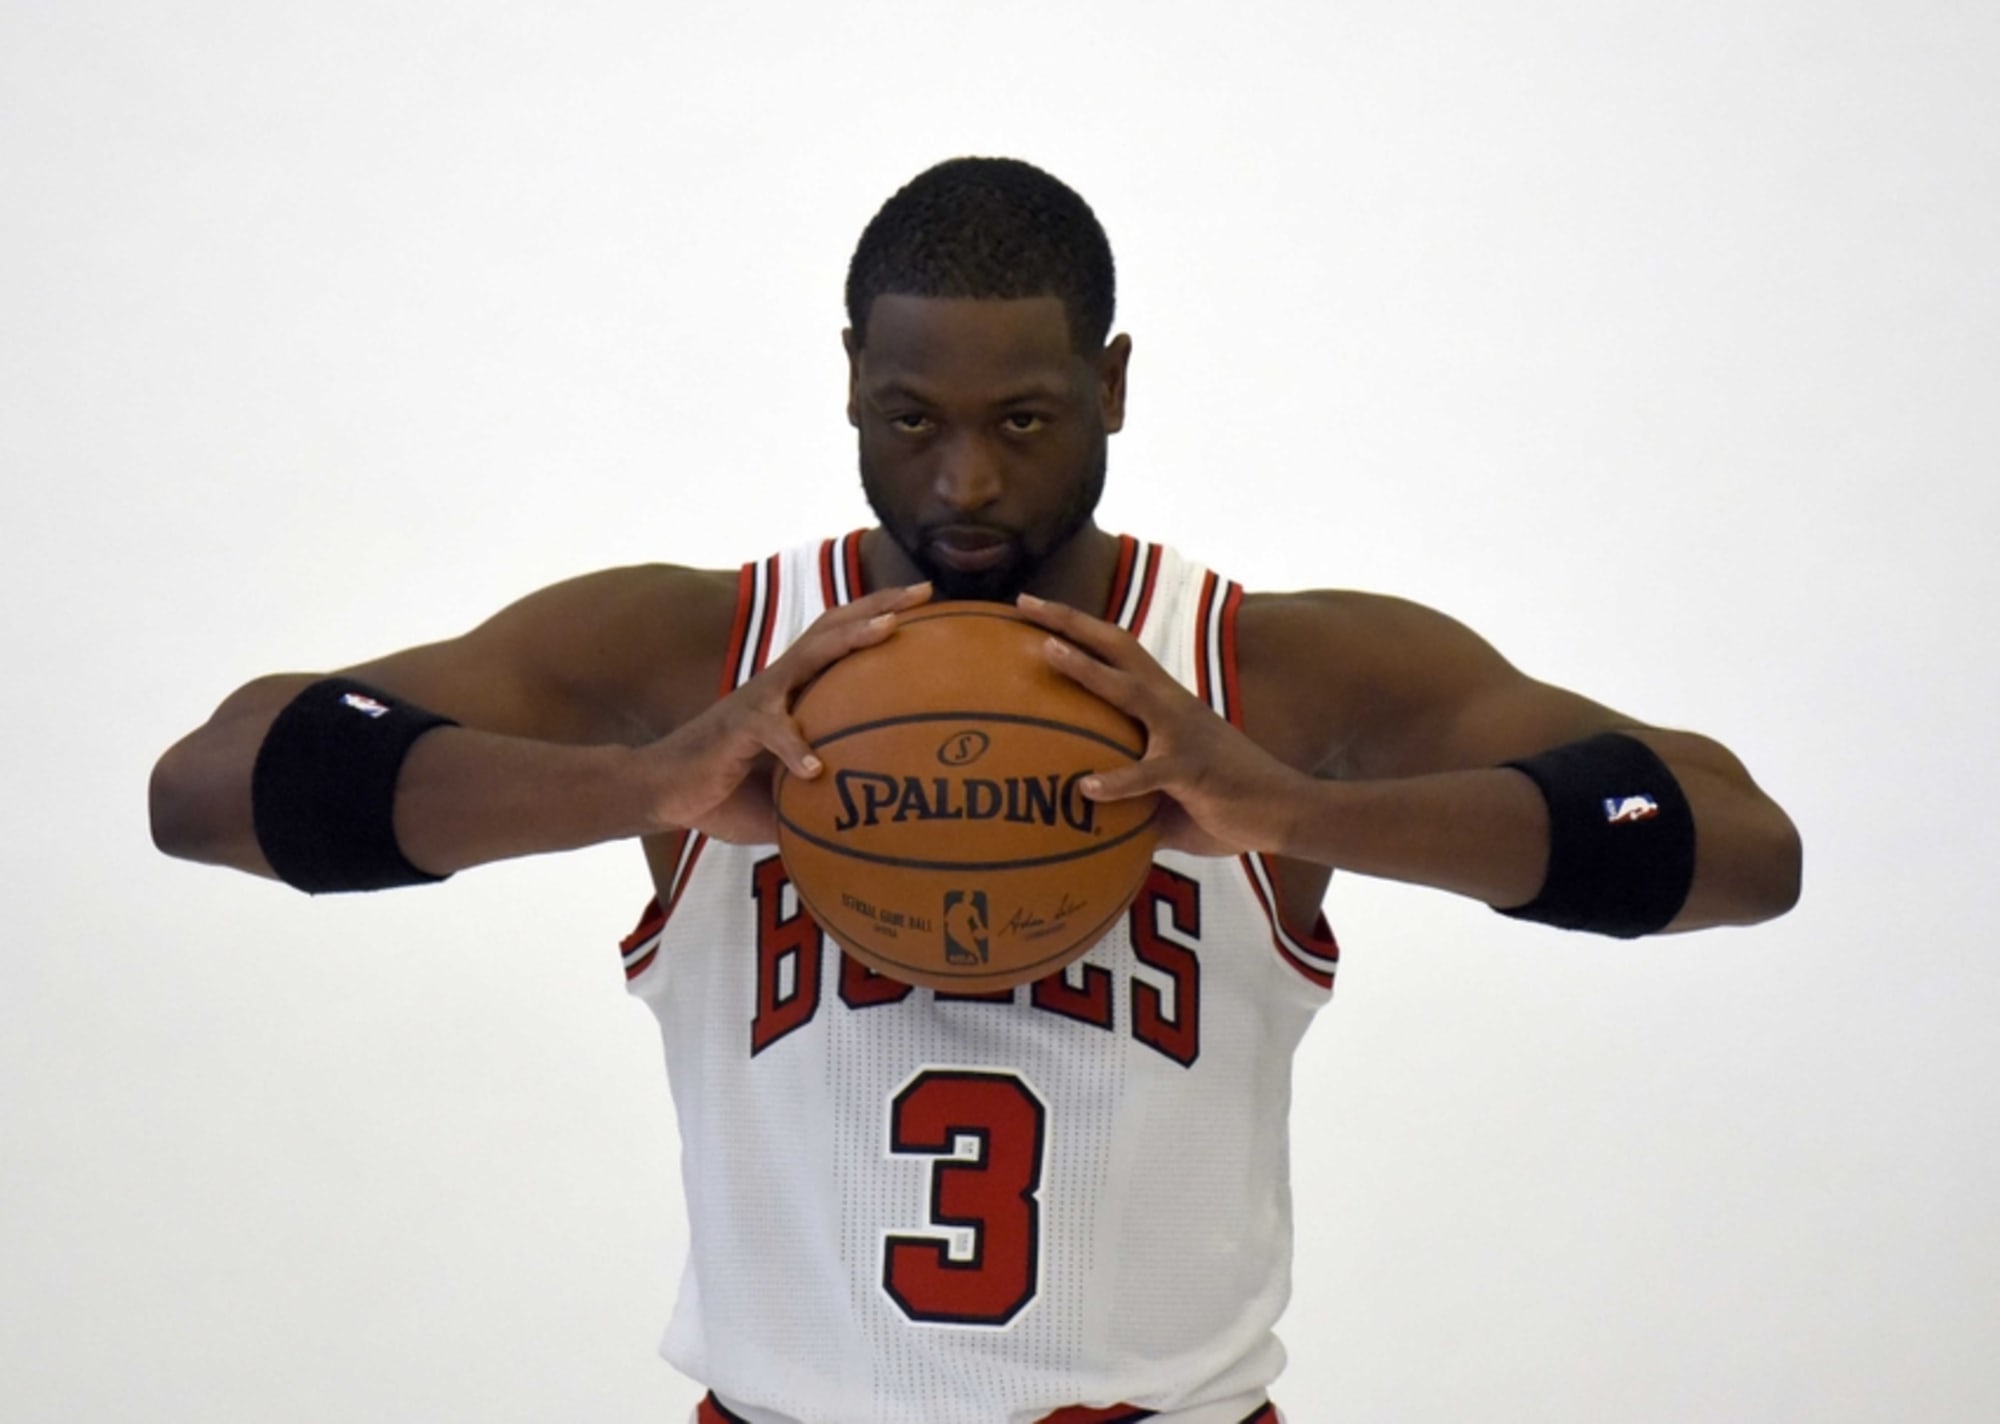 Dwyane Wade chooses the Chicago Bulls over the Nuggets and Heat -  Denverite, the Denver site!